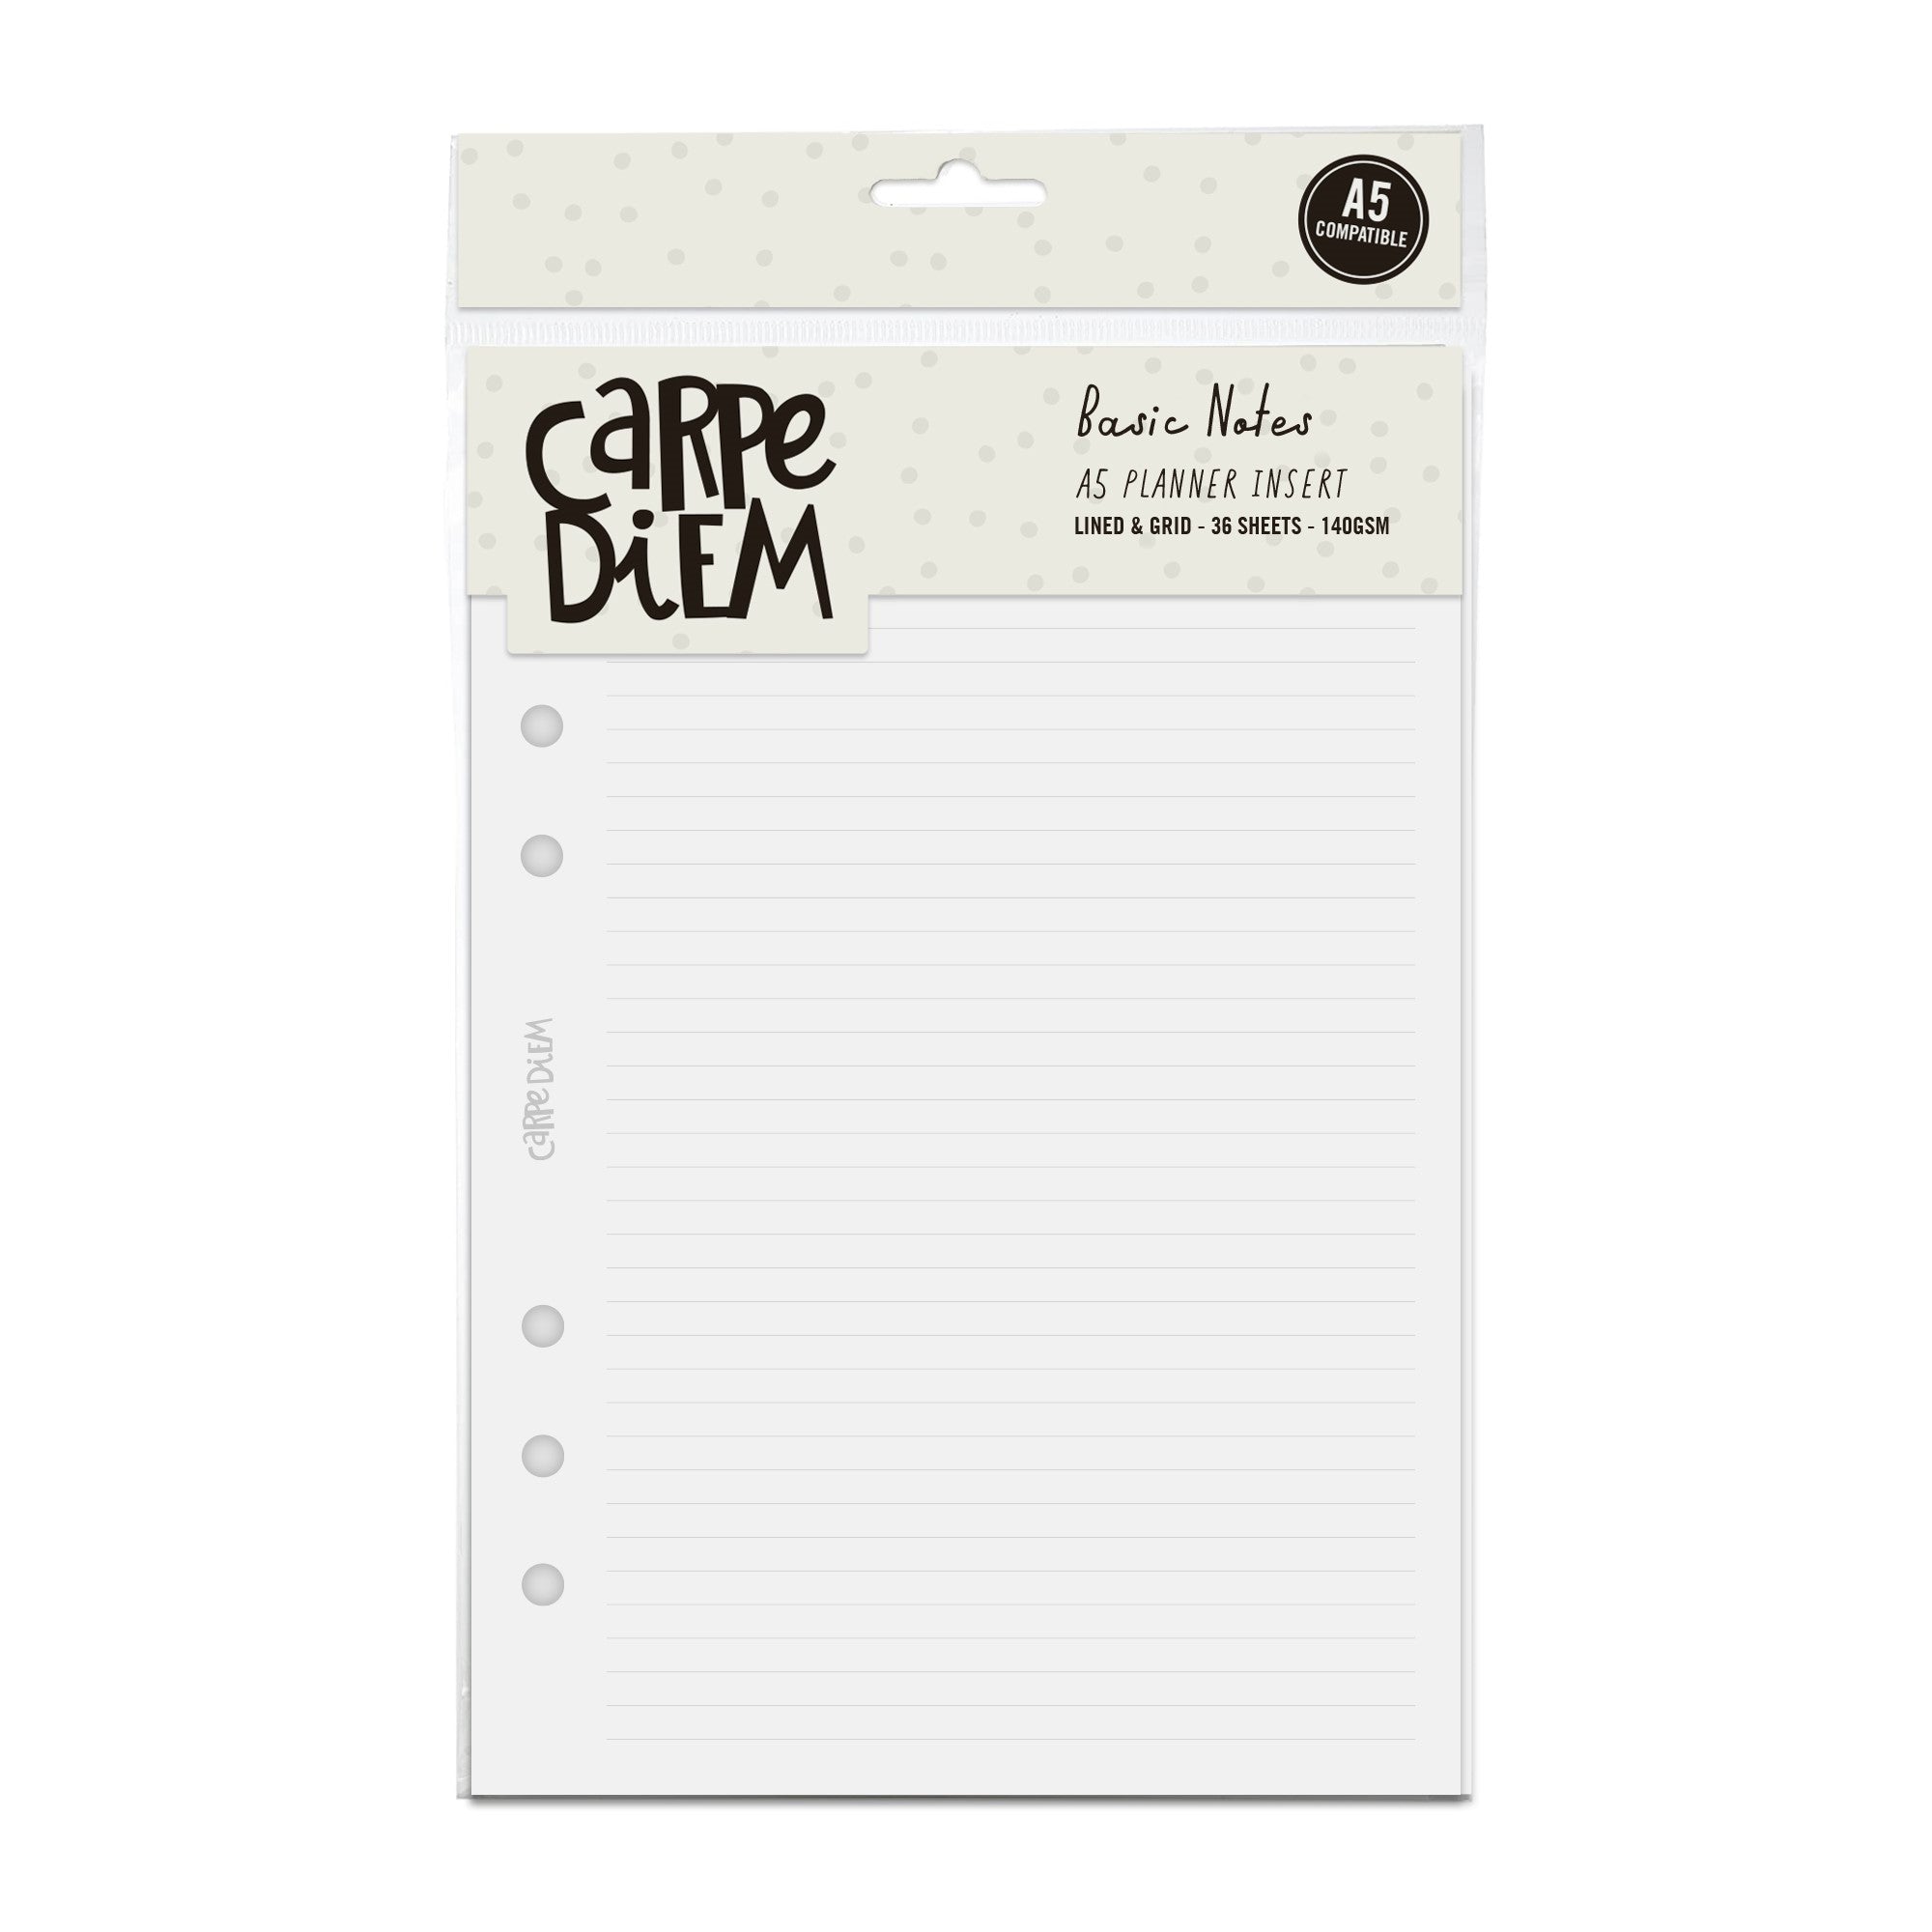 Basic Lined and Grid A5 Planner Inserts - Carpe Diem Planners